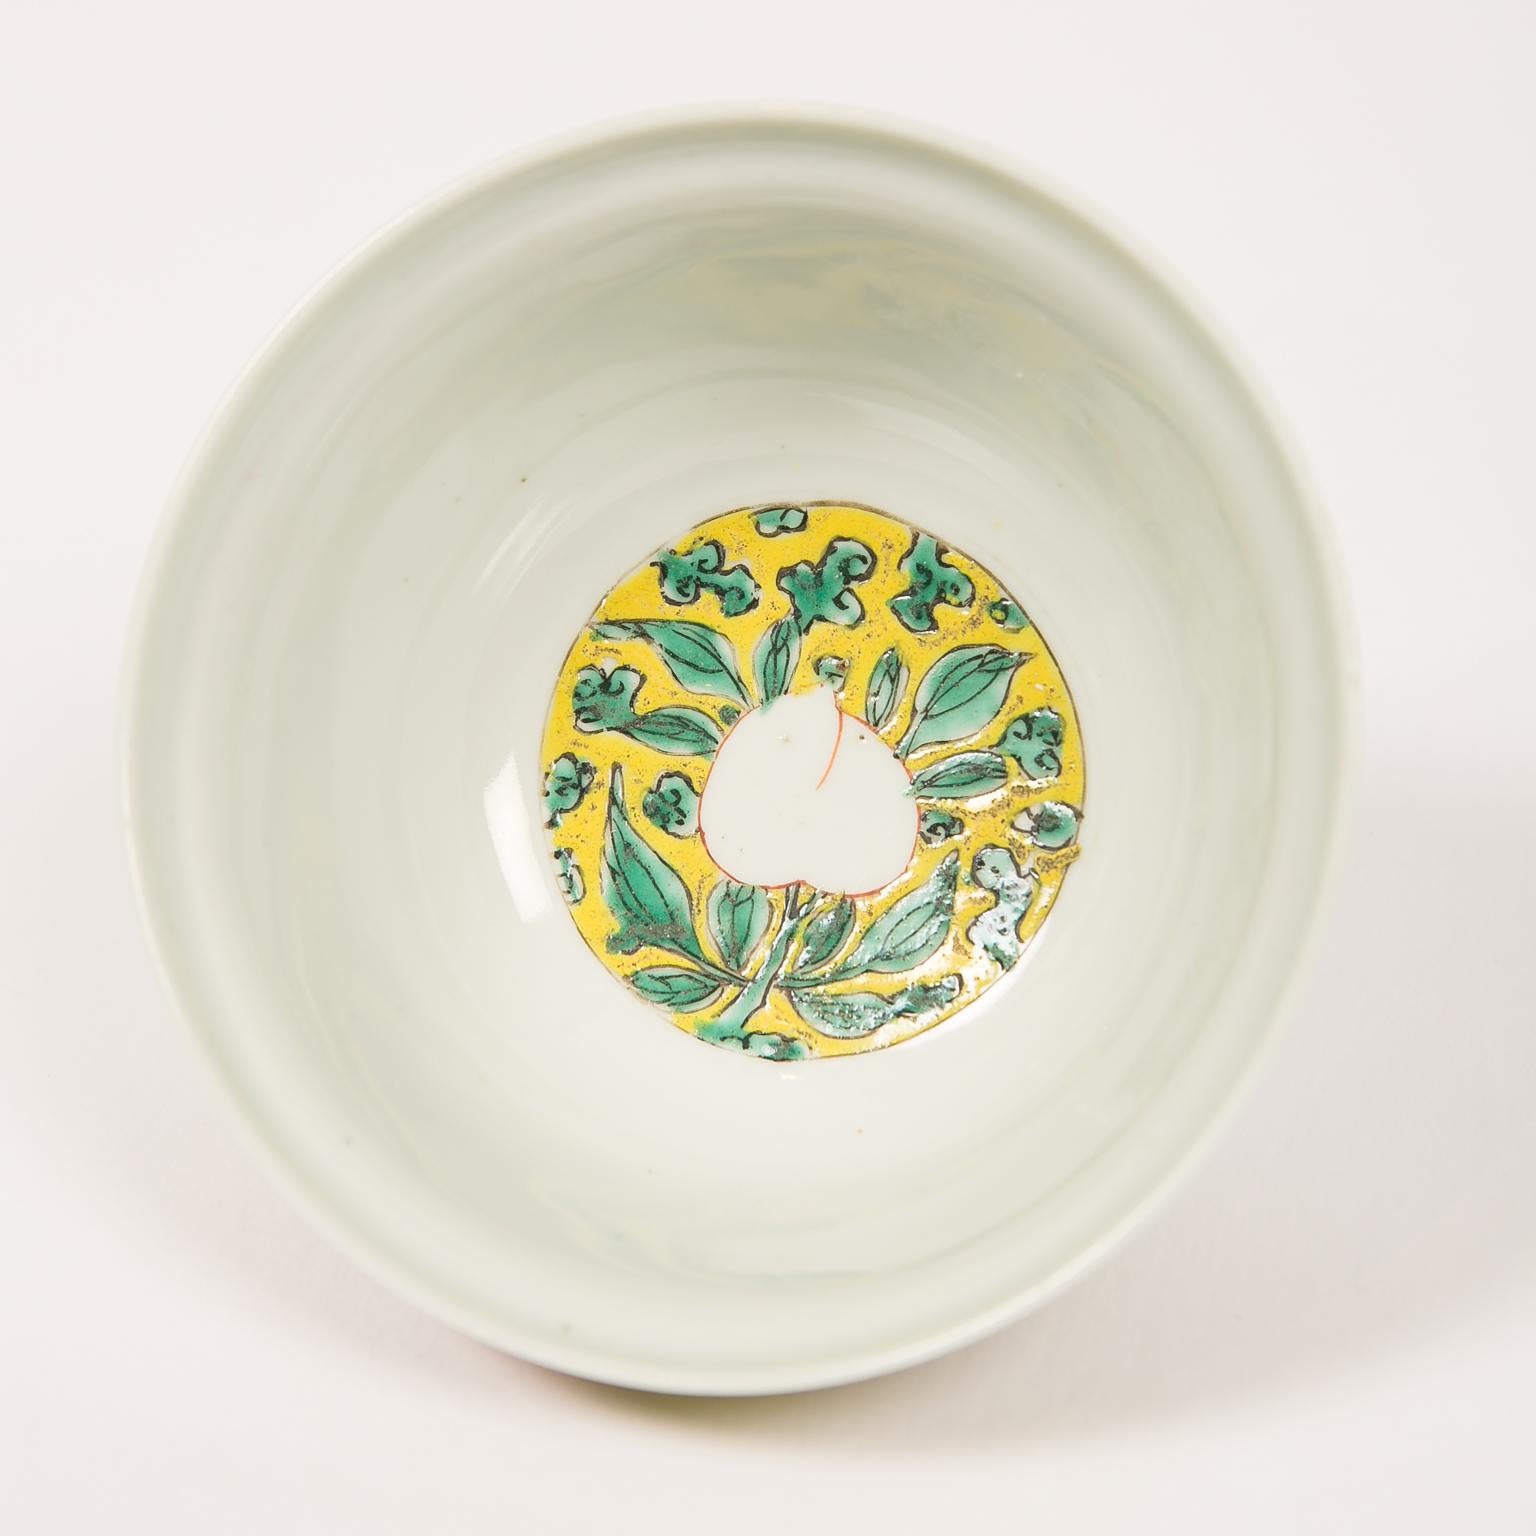 Qing Chinese Porcelain Bowl with 